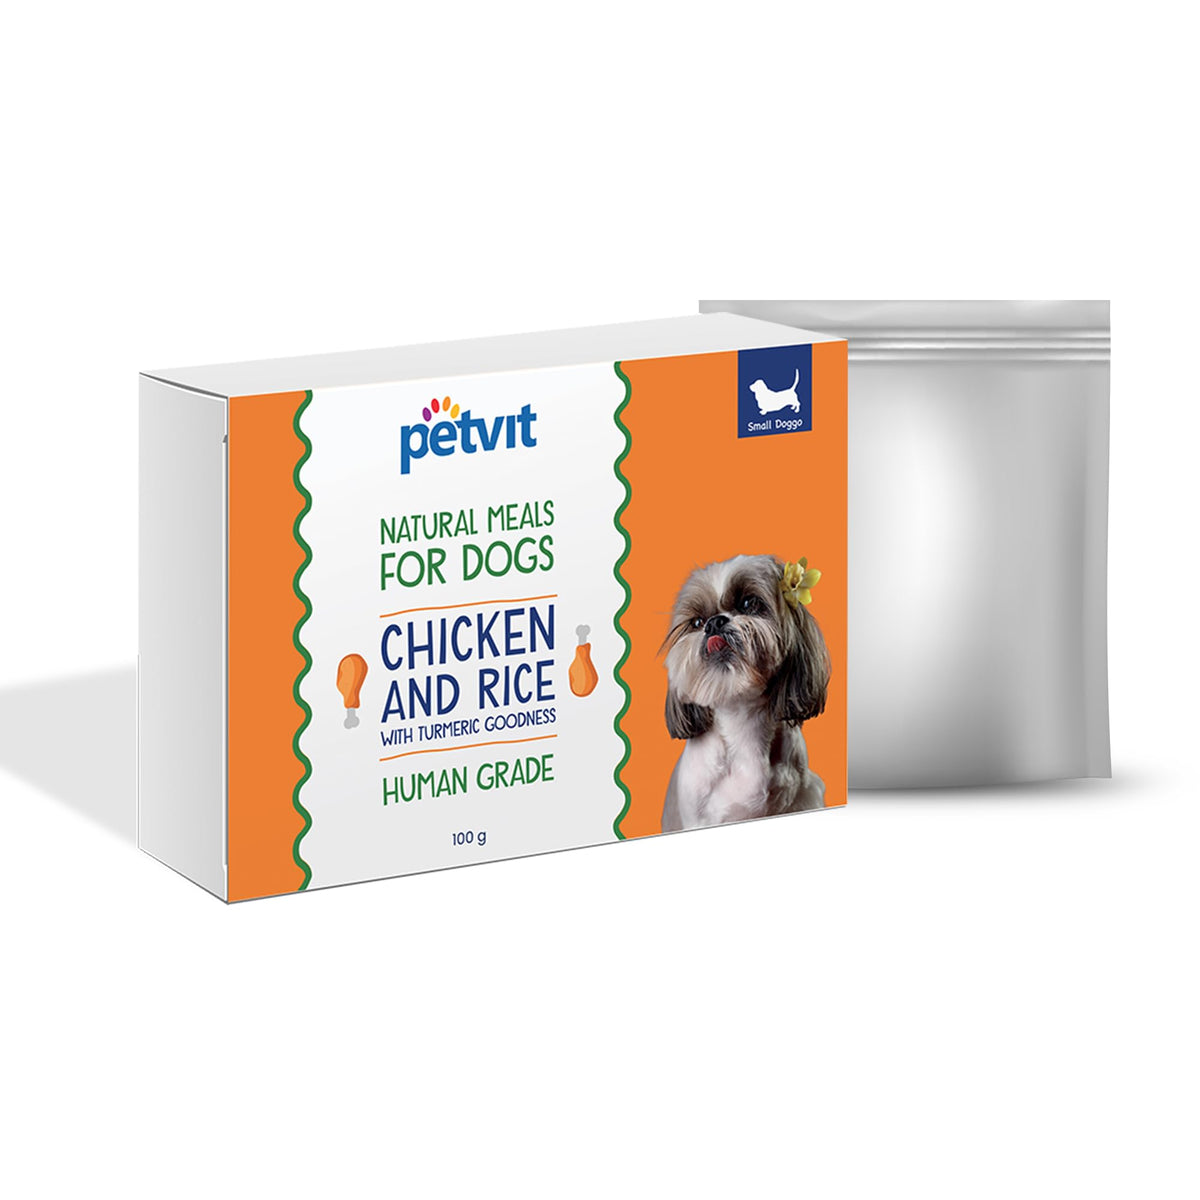 Petvit Chicken Rice Dog Food with Real Chicken Meat, Supports Joint and Bone Health, Enhanced with Antioxidant-Rich Turmeric - Healthy and Nutritional Pet Food | Pack of 1 (100g Each)